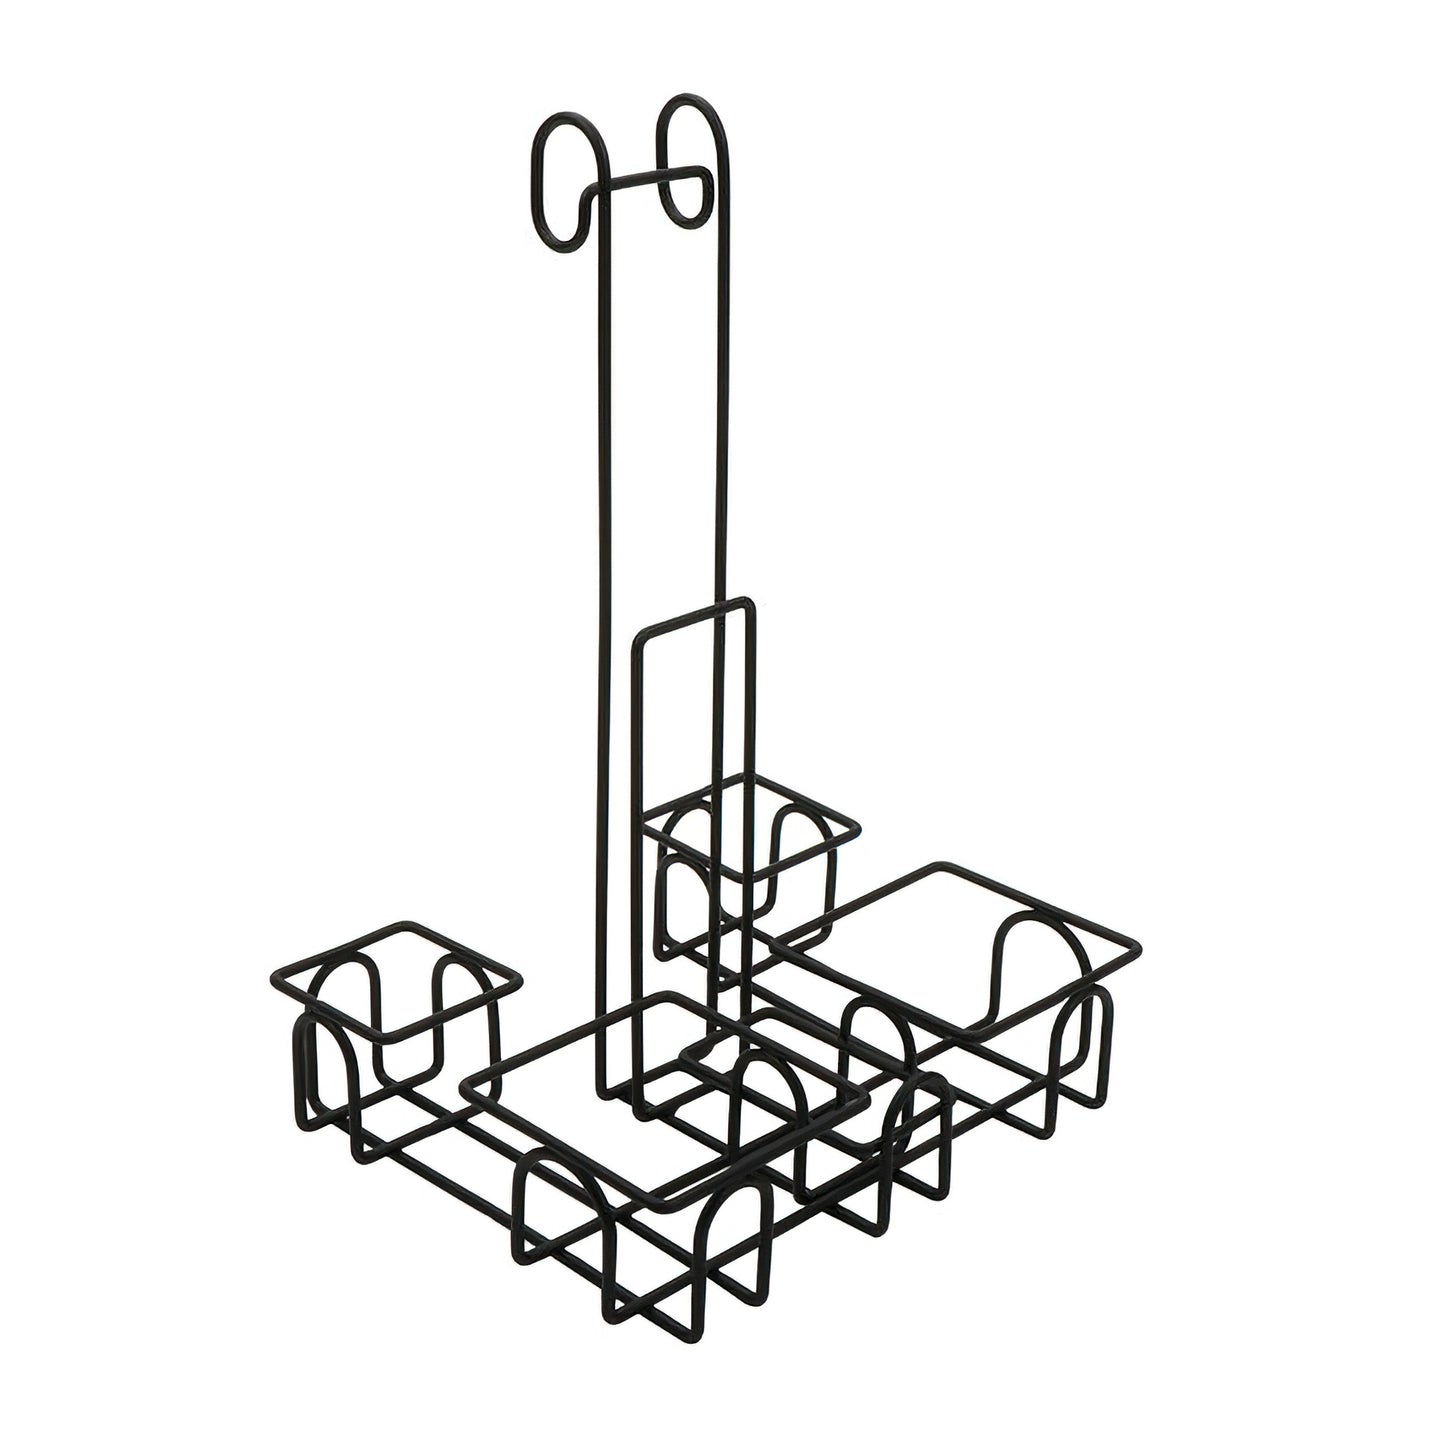 6.5" x 8" Wire Caddy and Menu Stand, 11.5" Tall. 2 Large Squares: 2 7/8", 2 Small Squares: 1 7/8"